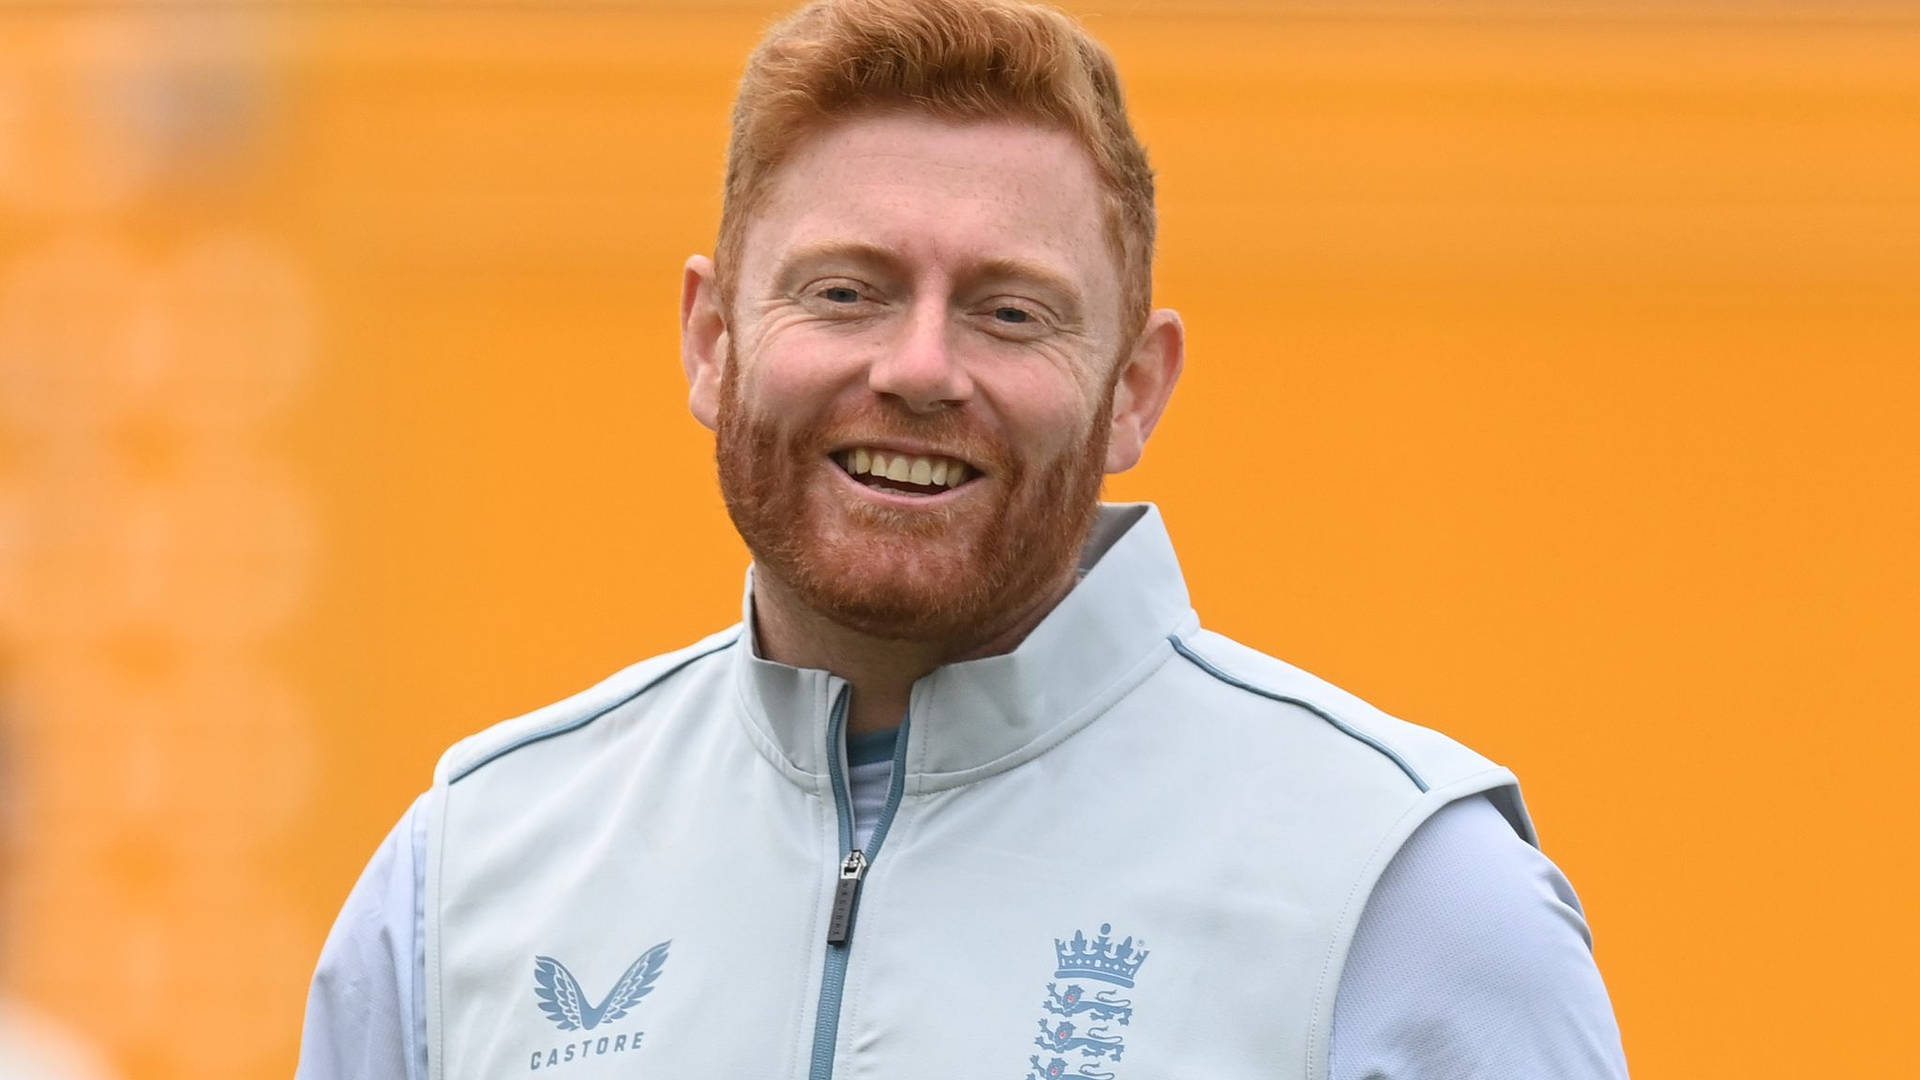 Engaging Smile Of Jonny Bairstow, The Cricket Whiz Background